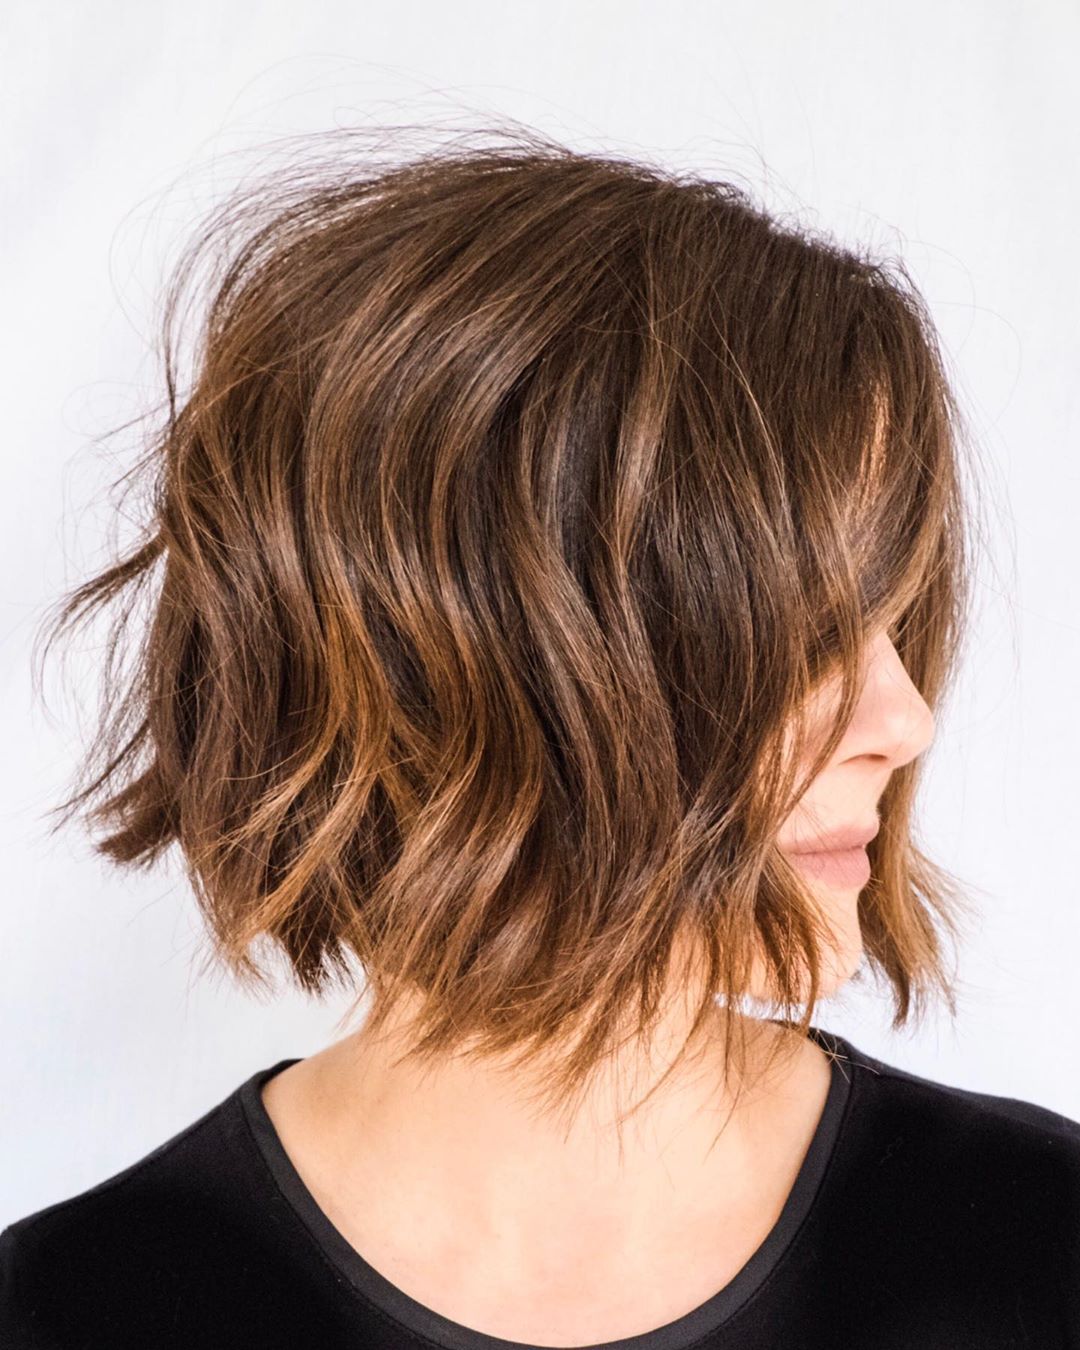 30 Gorgeous Short Hairstyles for Women Over 40